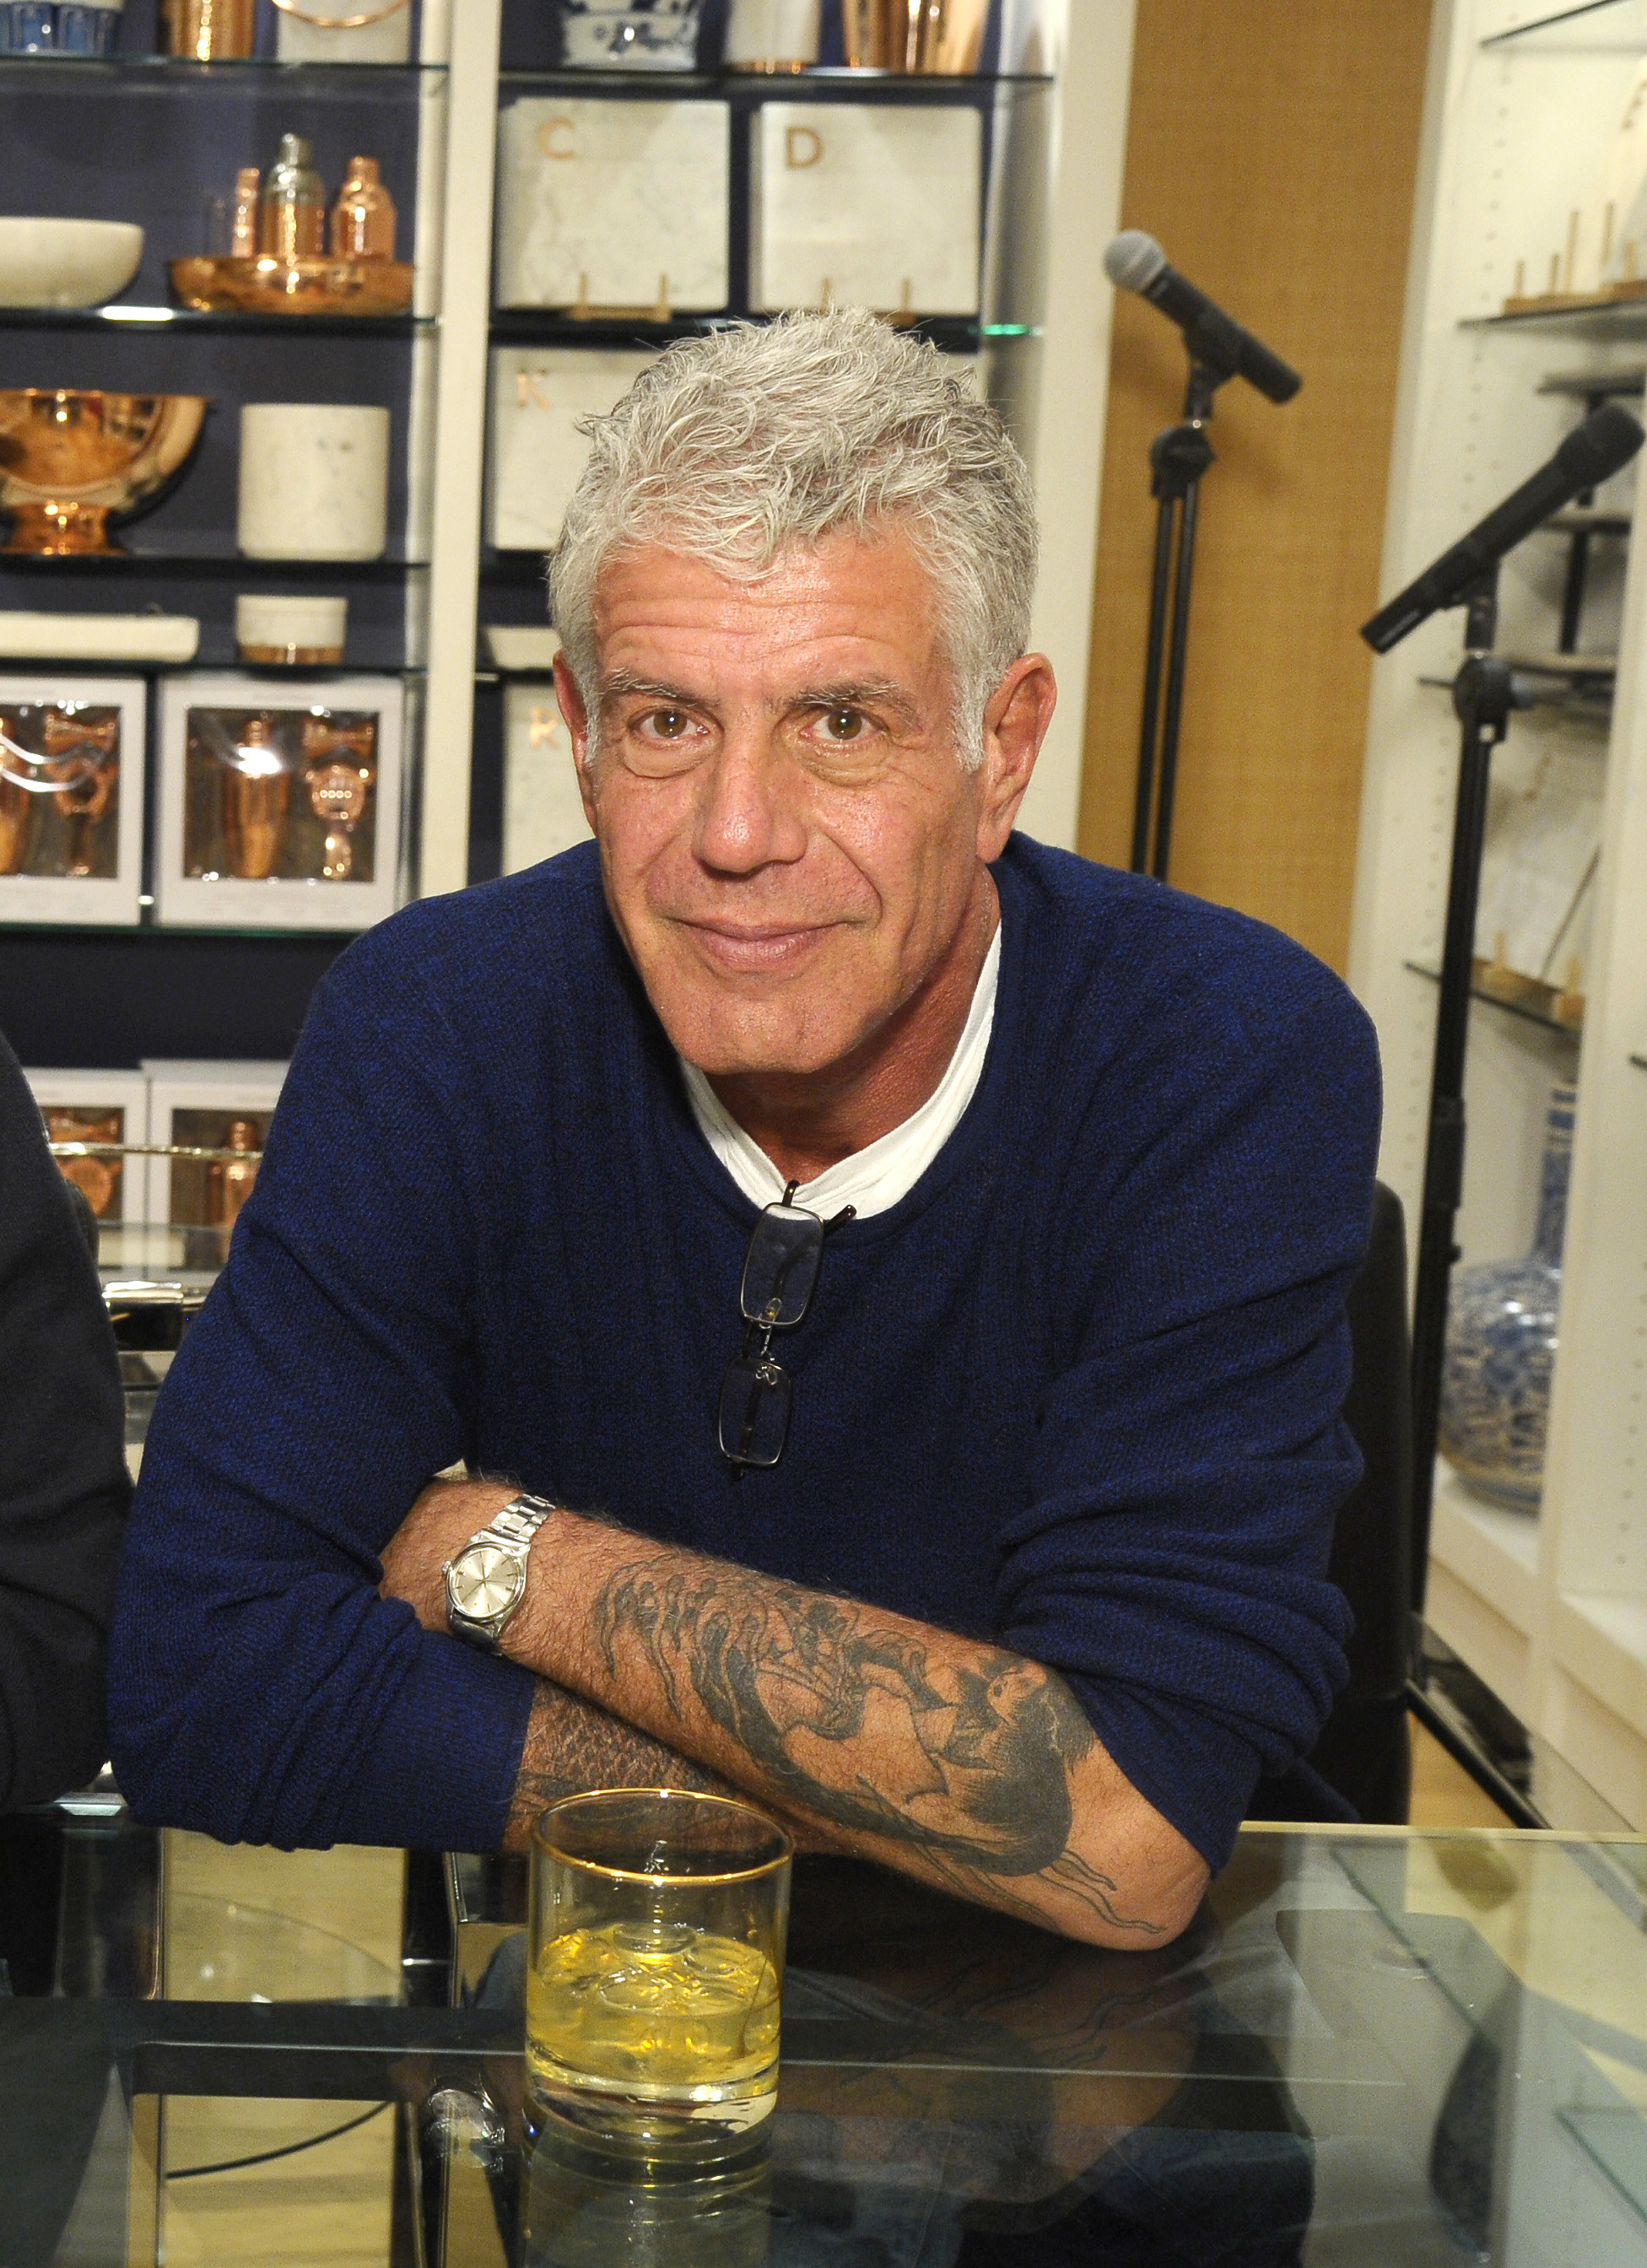 A closeup of Anthony Bourdain sitting with his arms crossed on a table with a drink